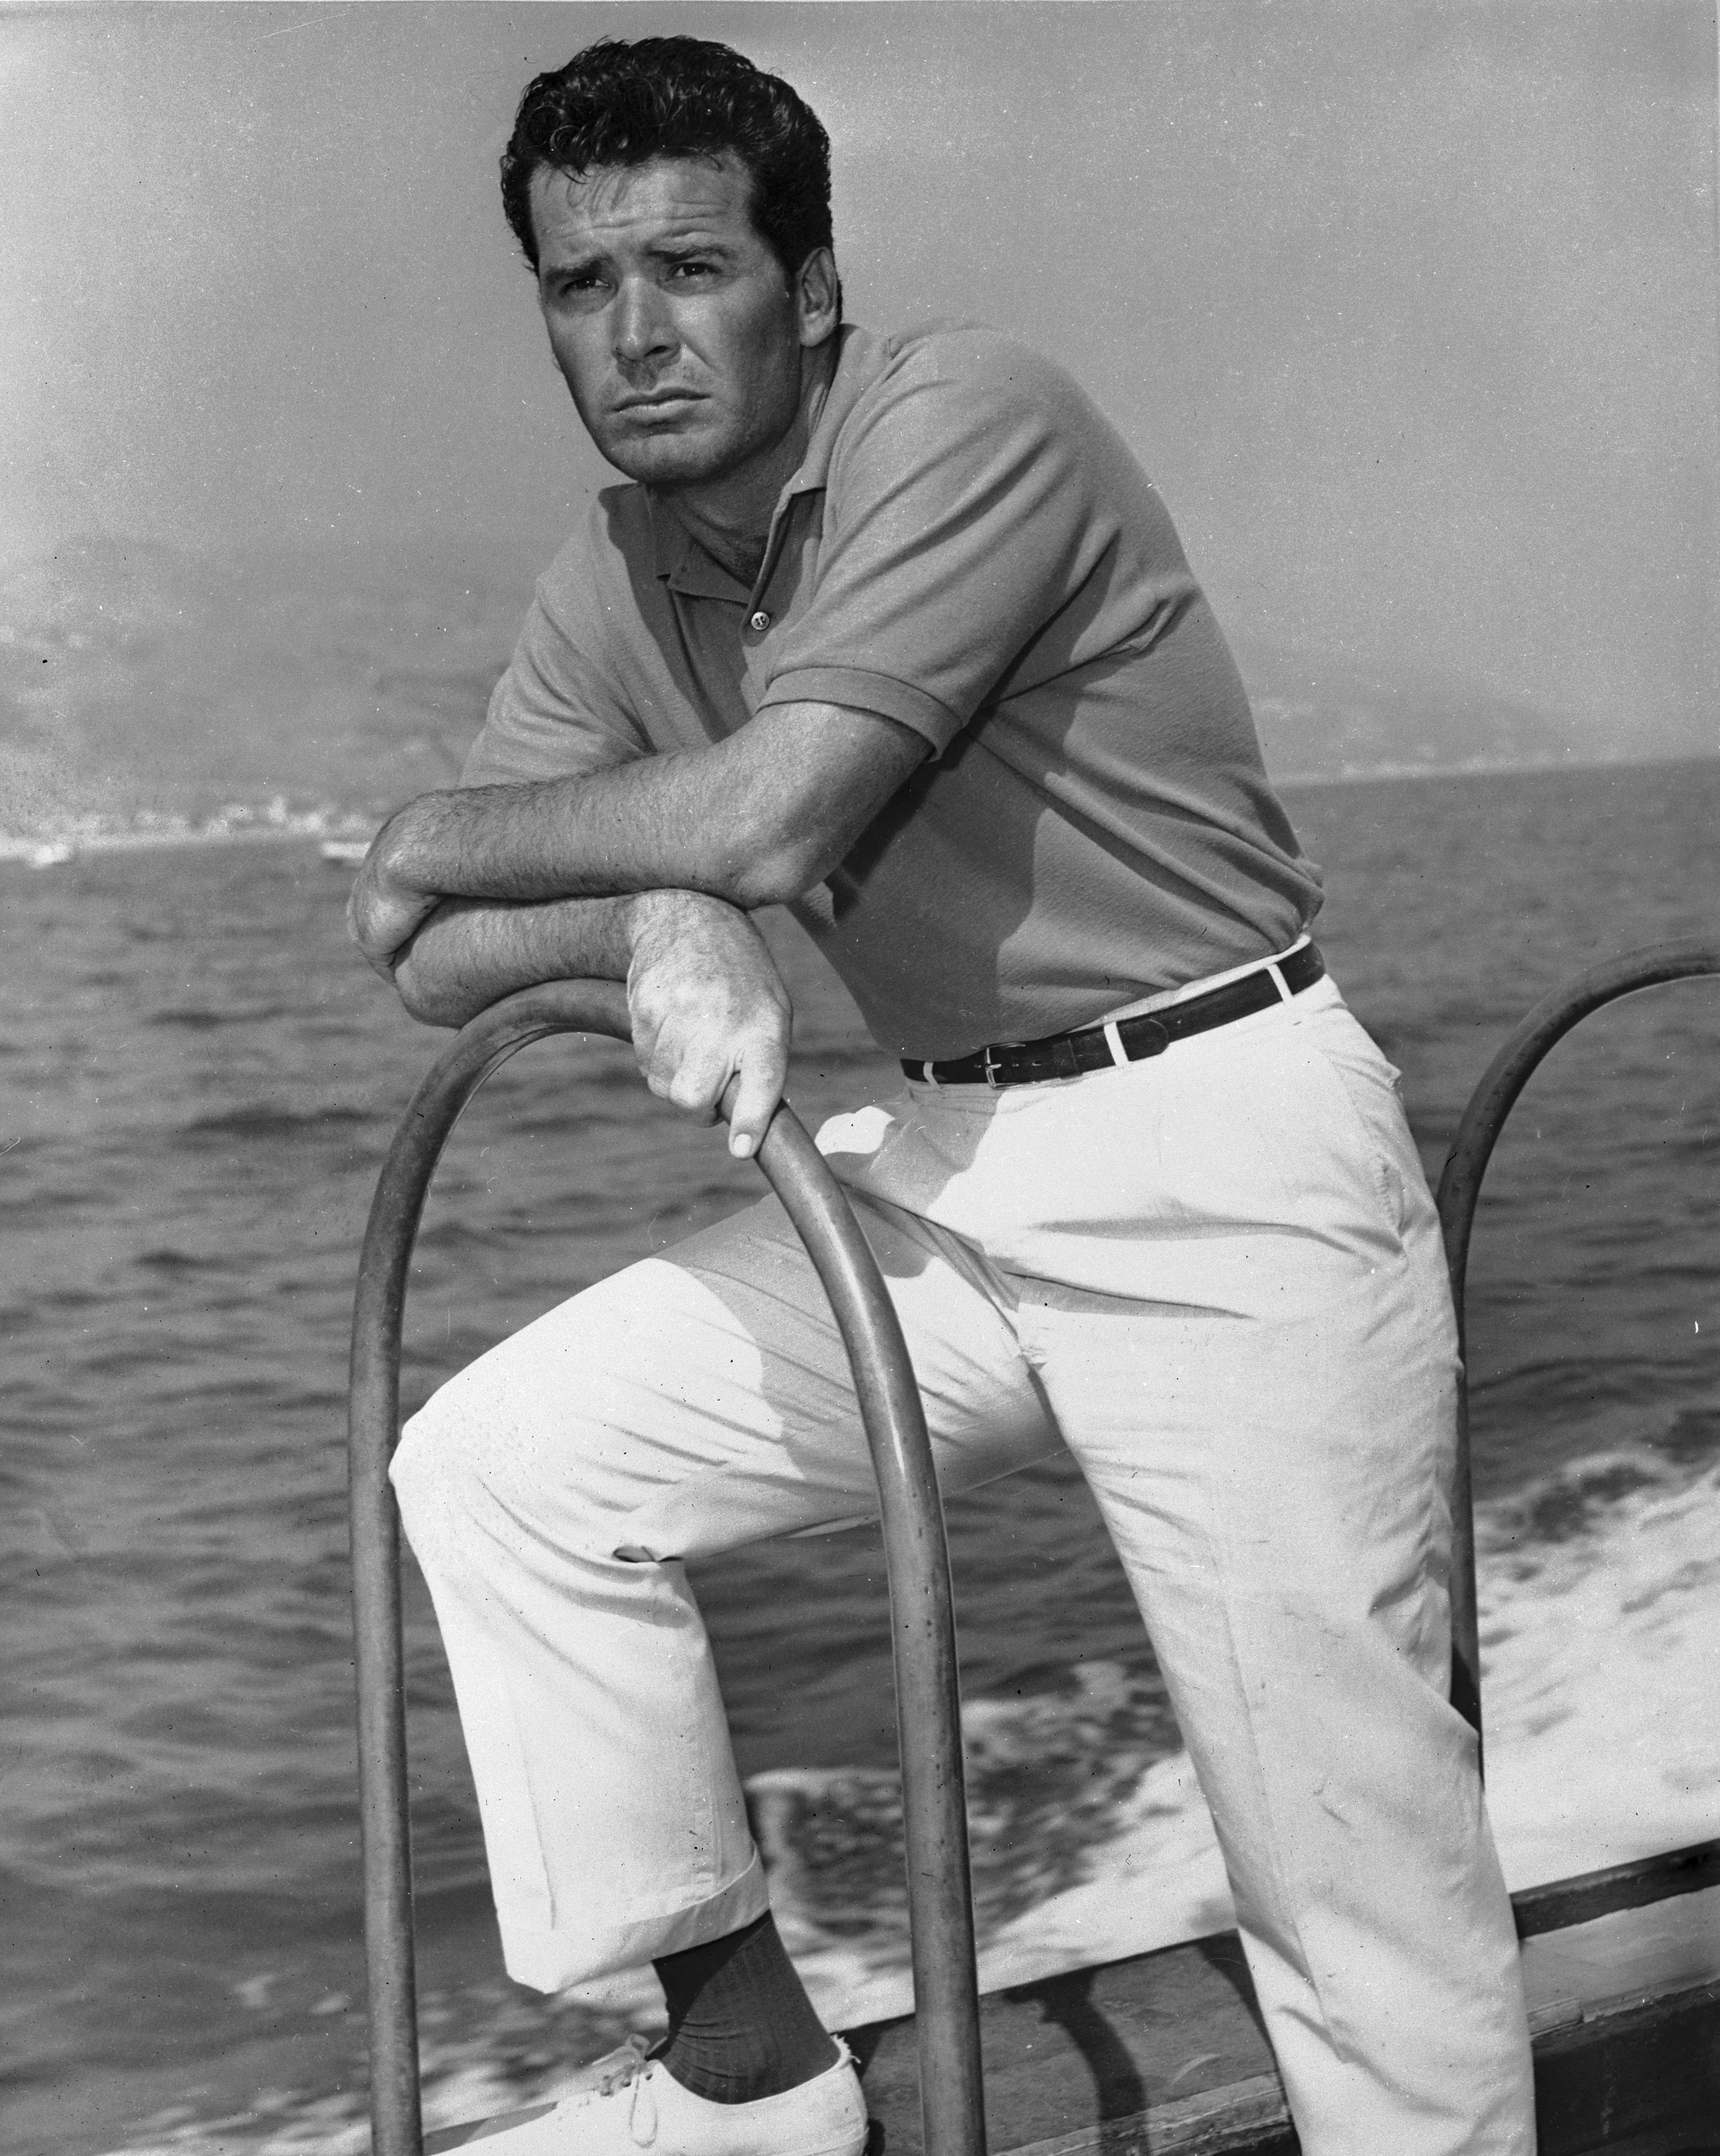 James Garner as Jim Rockford on the television series "The Rockford Files" | Source: Getty Images